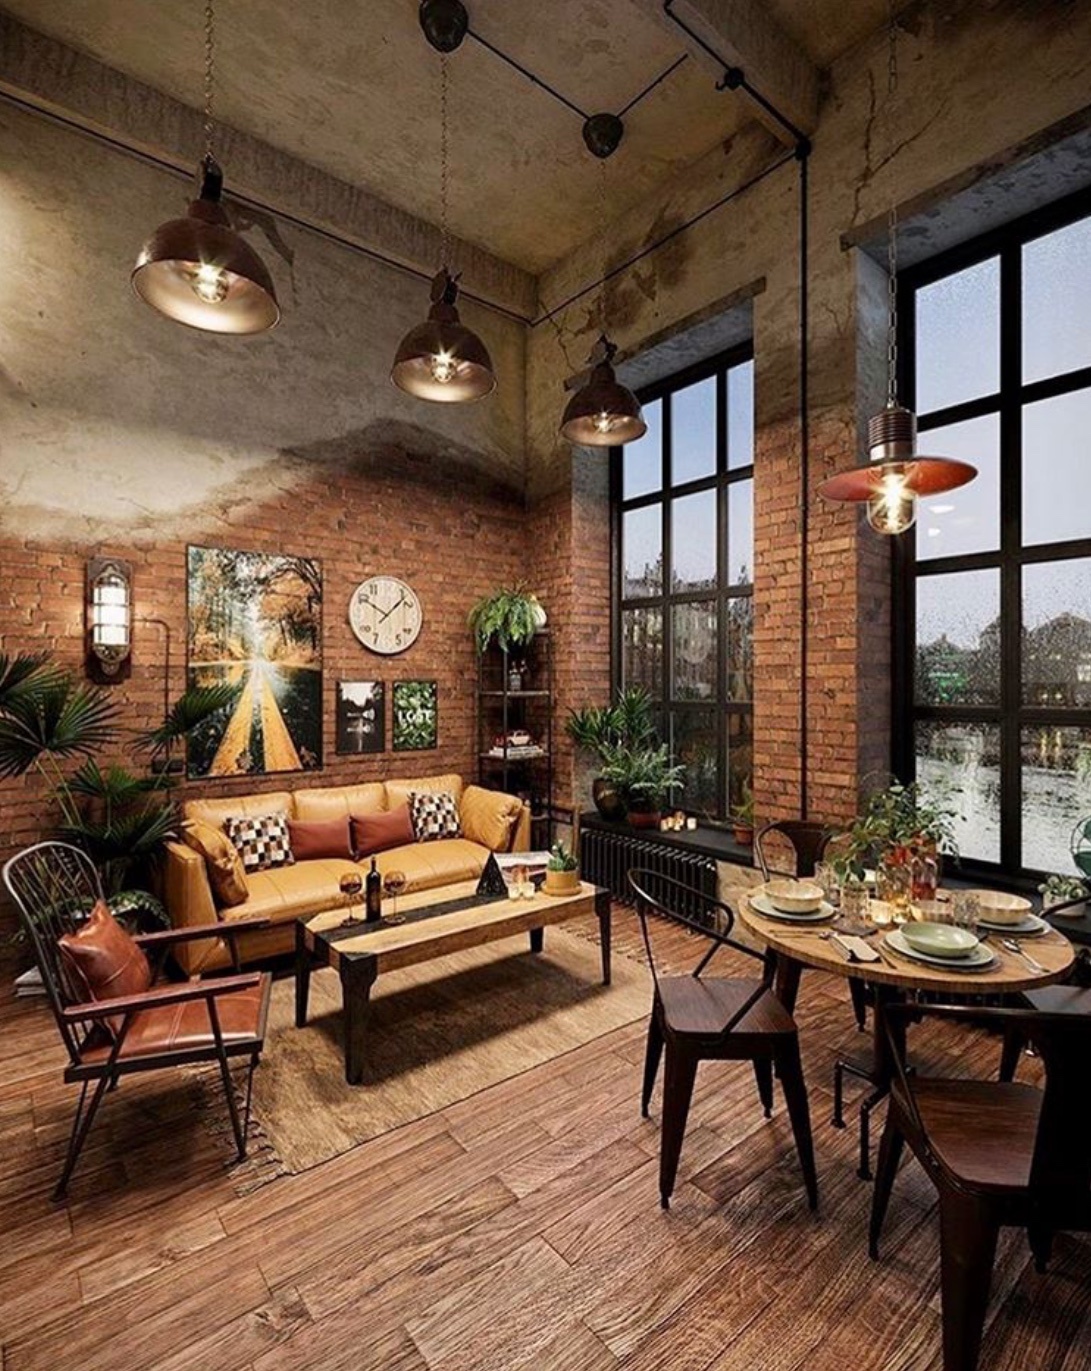 7 Industrial Style Lighting Fixtures To Add Character To Your Loft Apartment